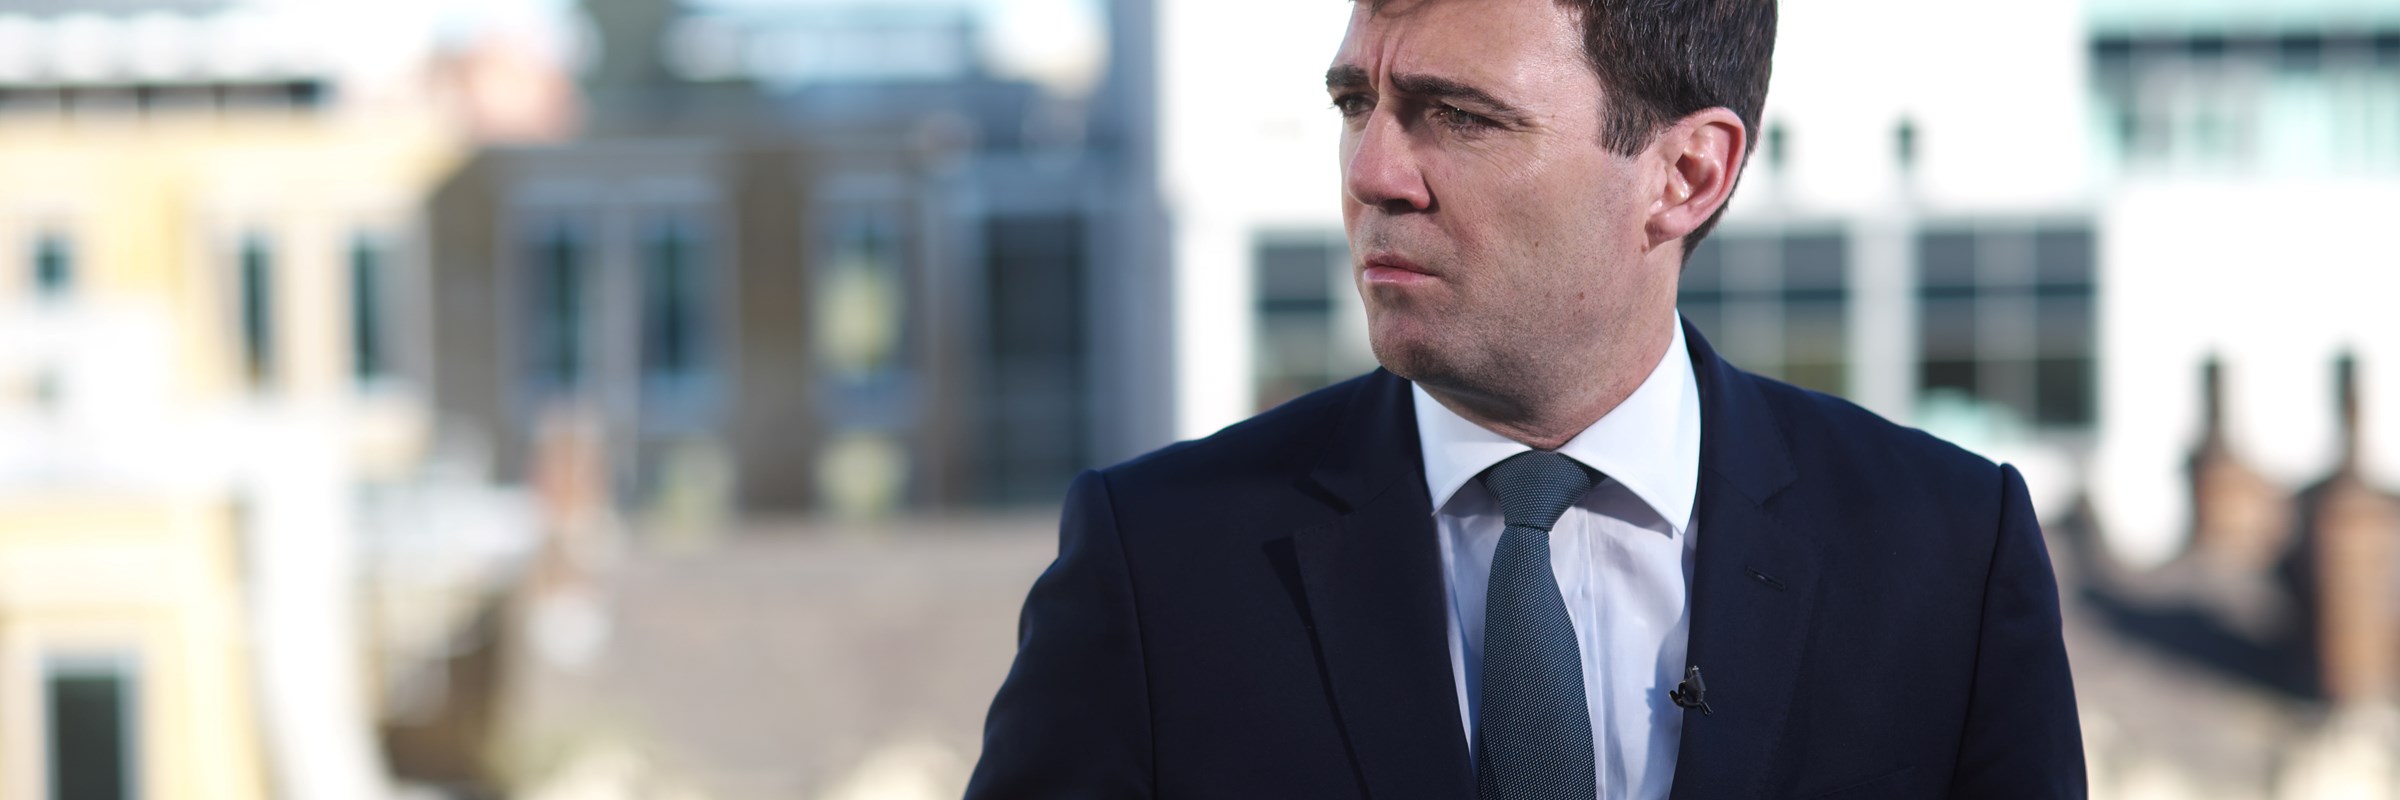 Mayor of Greater Manchester, Andy Burnham, in front of Manchester skyline